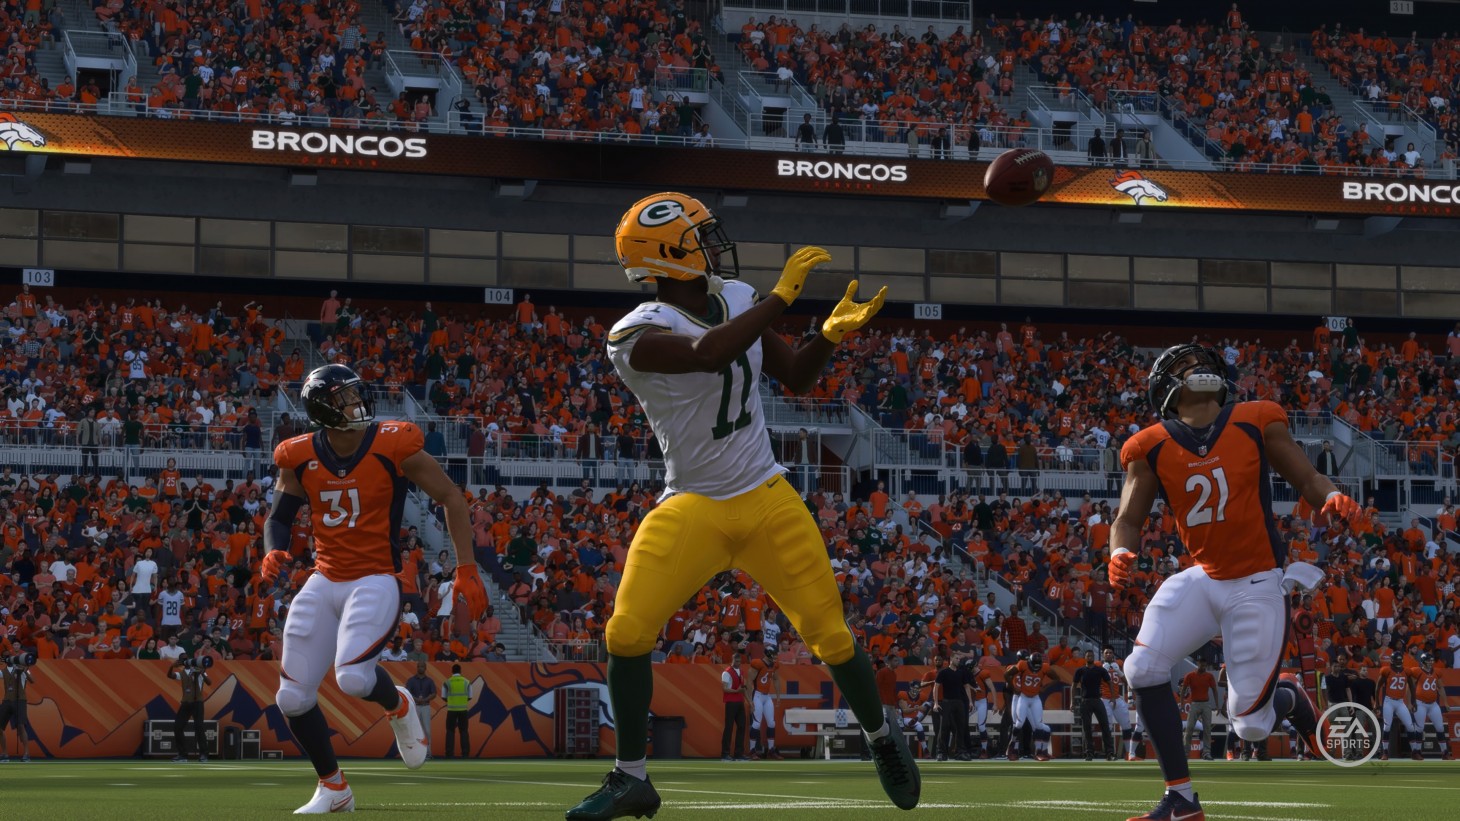 Back in game: NFL announces partnership with 2K Sports - The